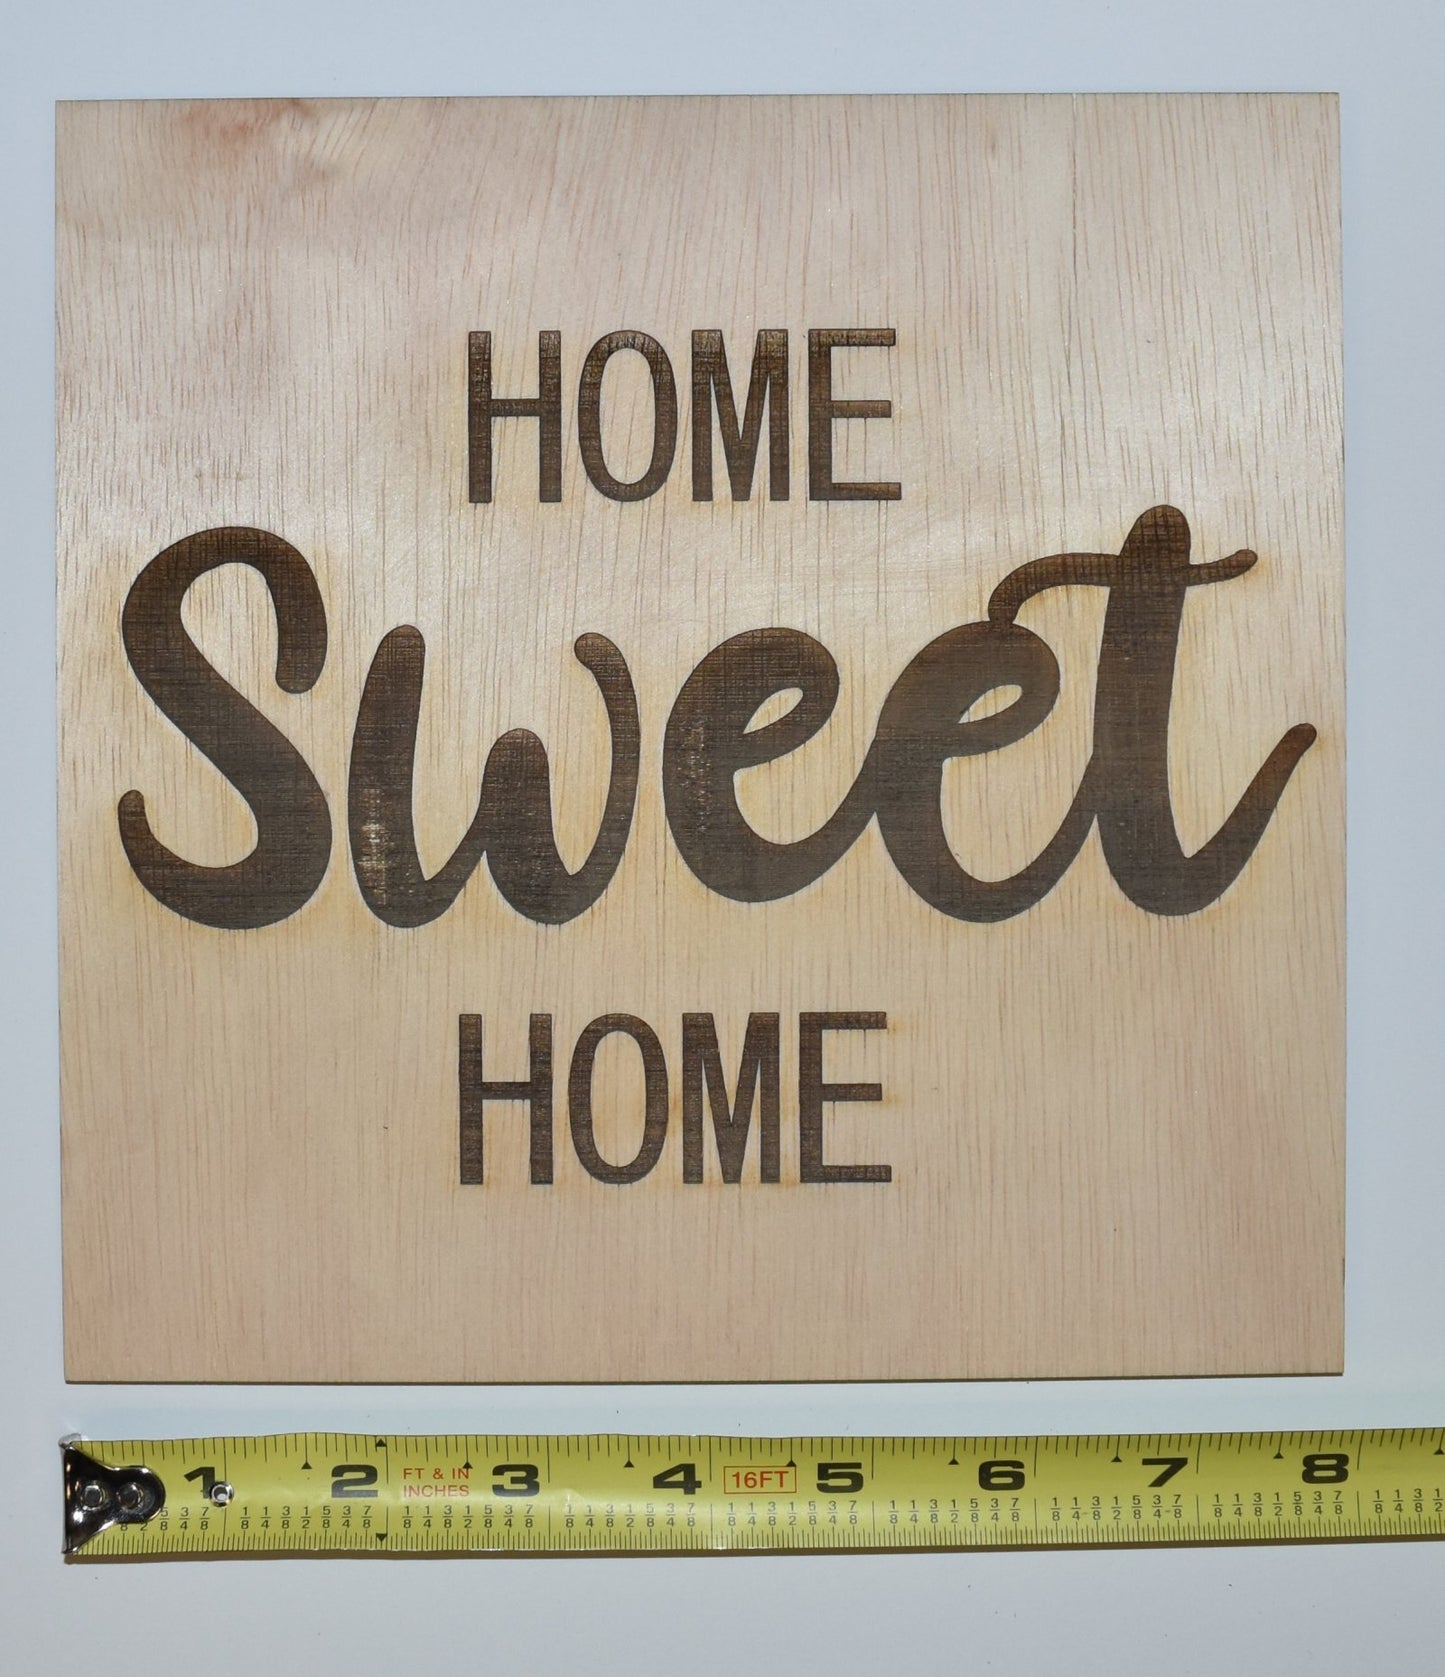 Home Sweet Home Wood Sign Wooden Hanging Decor Made in USA LA152-WL